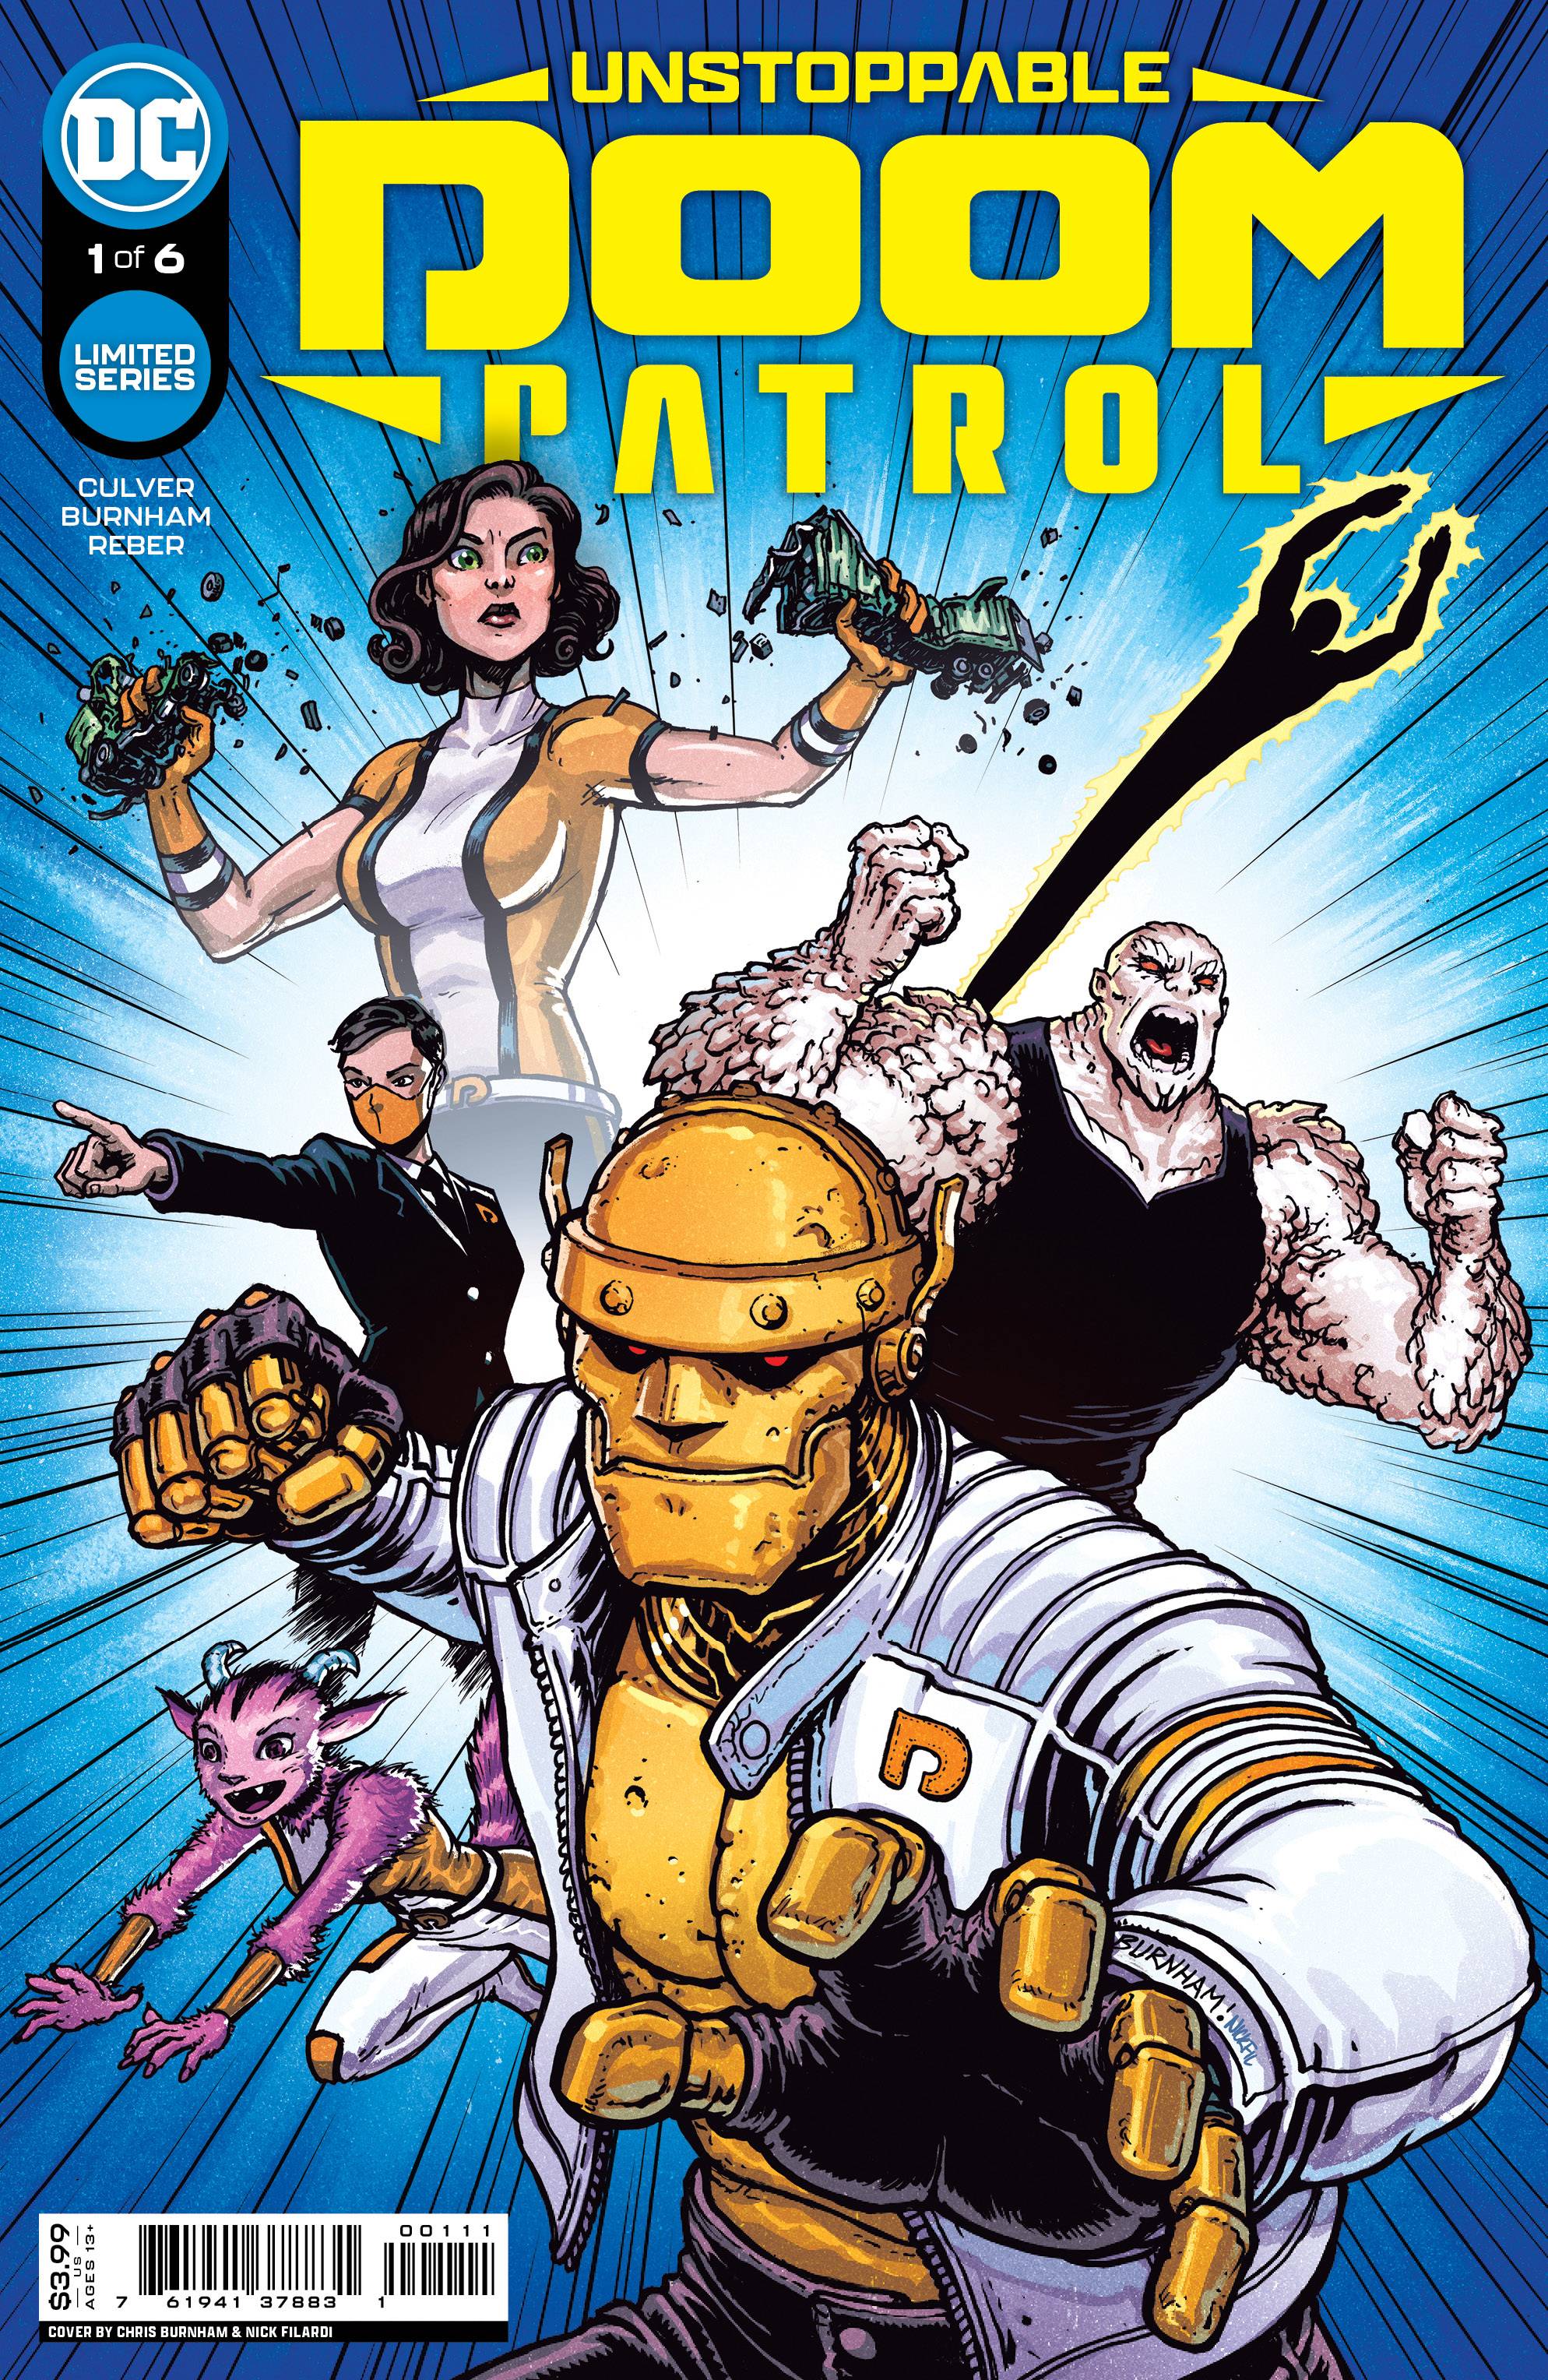 Unstoppable Doom Patrol #1 (Of 6) Cover A